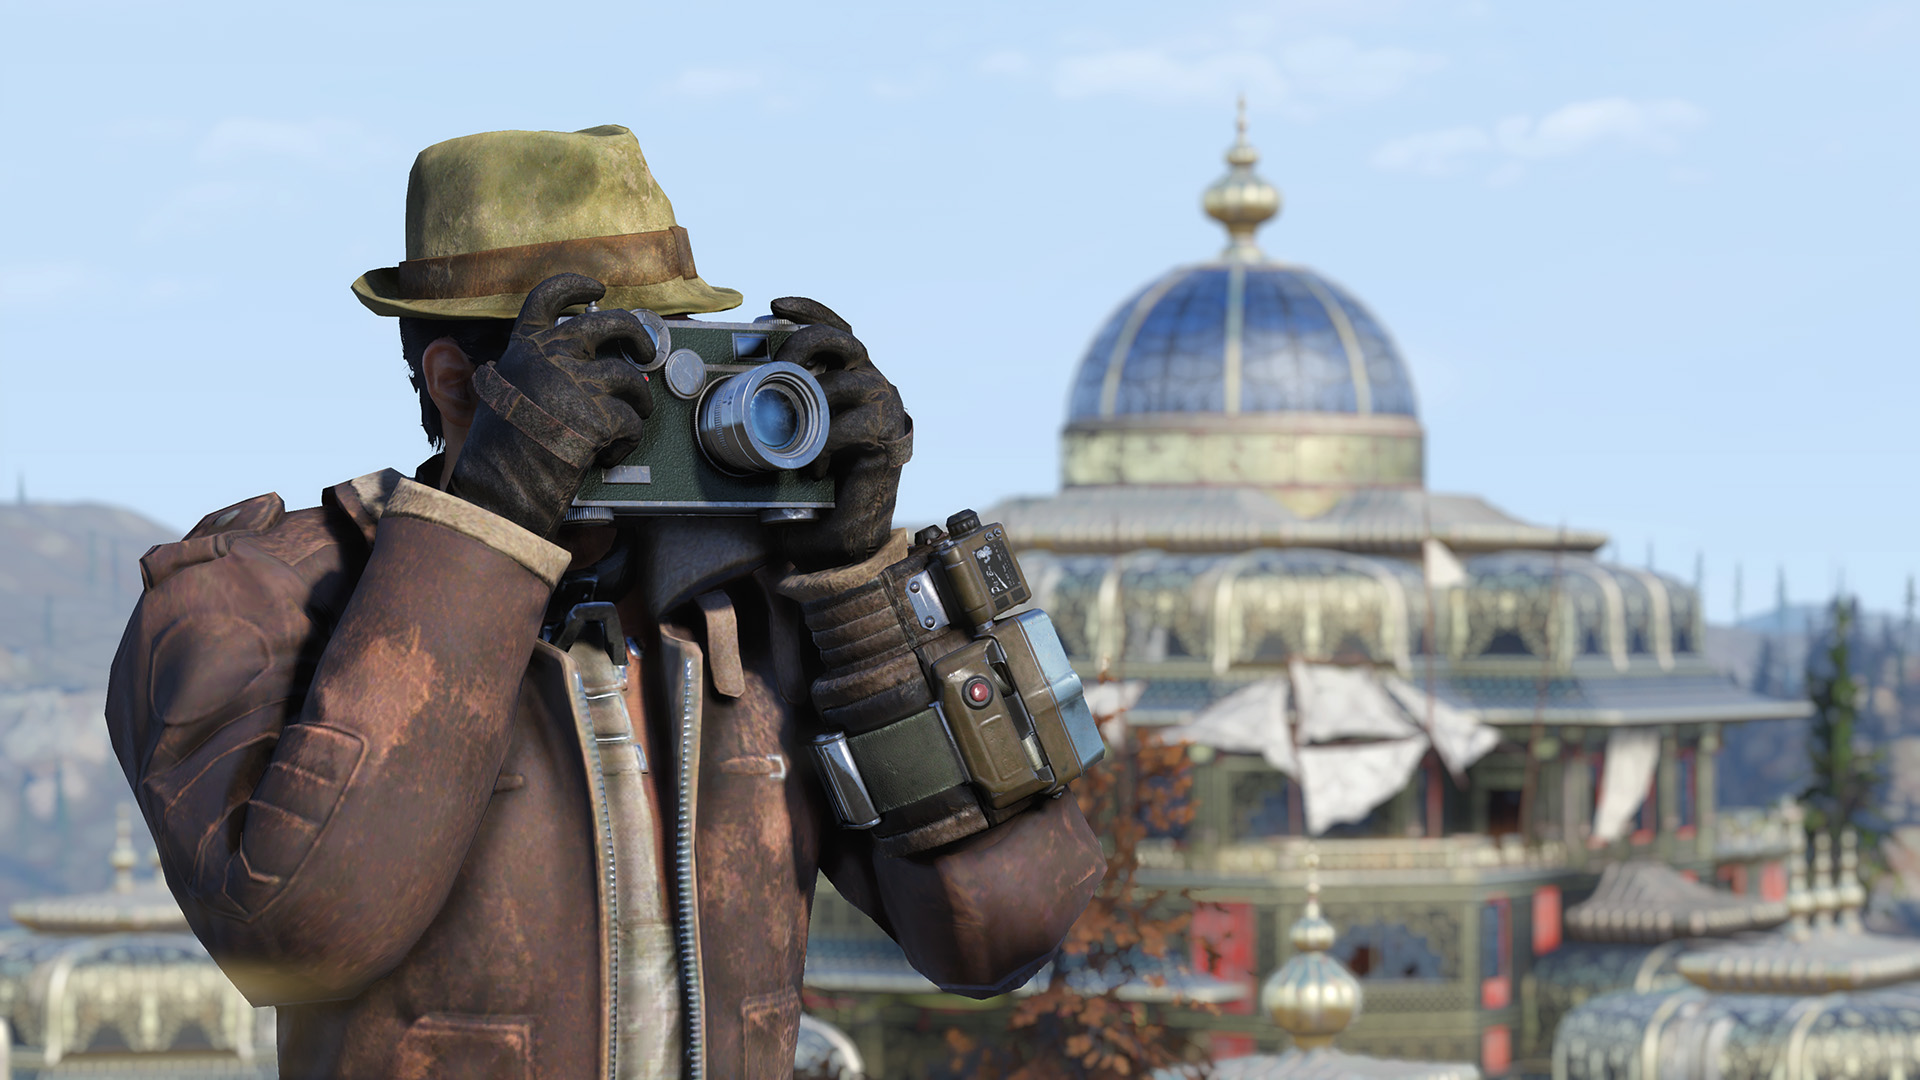 Divisive Repair Kits And A ProSnap Deluxe Camera Added To The Game With Fallout 76’s Latest Update